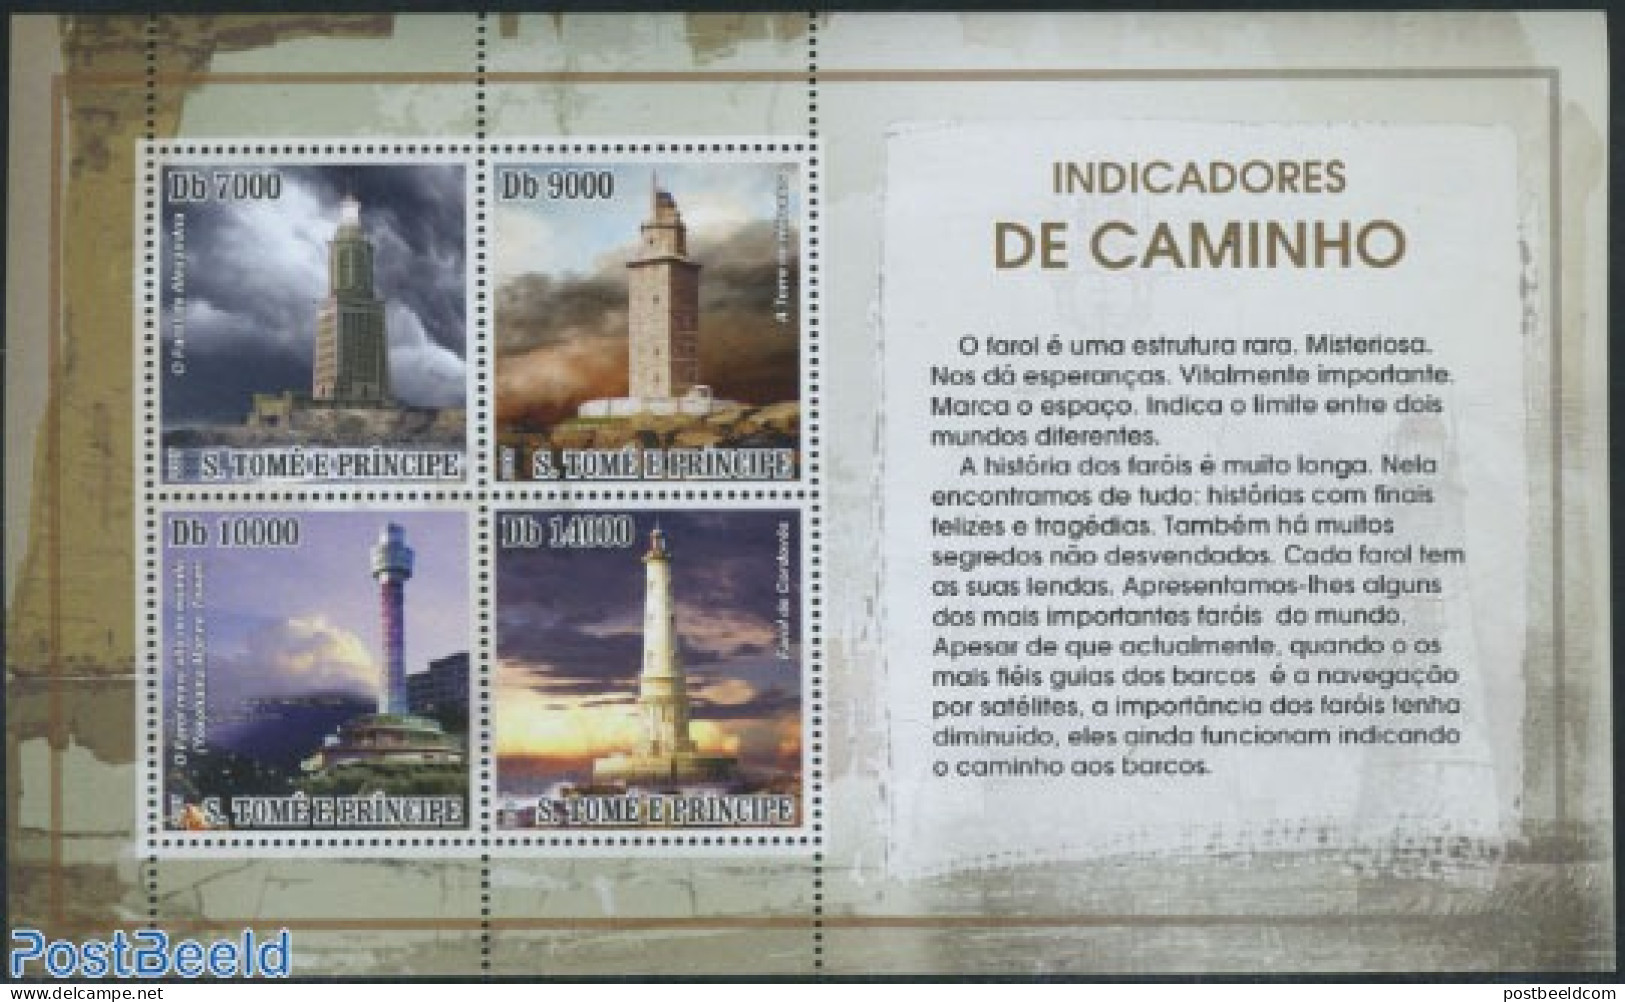 Sao Tome/Principe 2007 Lighthouses 4v M/s, Mint NH, Various - Lighthouses & Safety At Sea - Phares